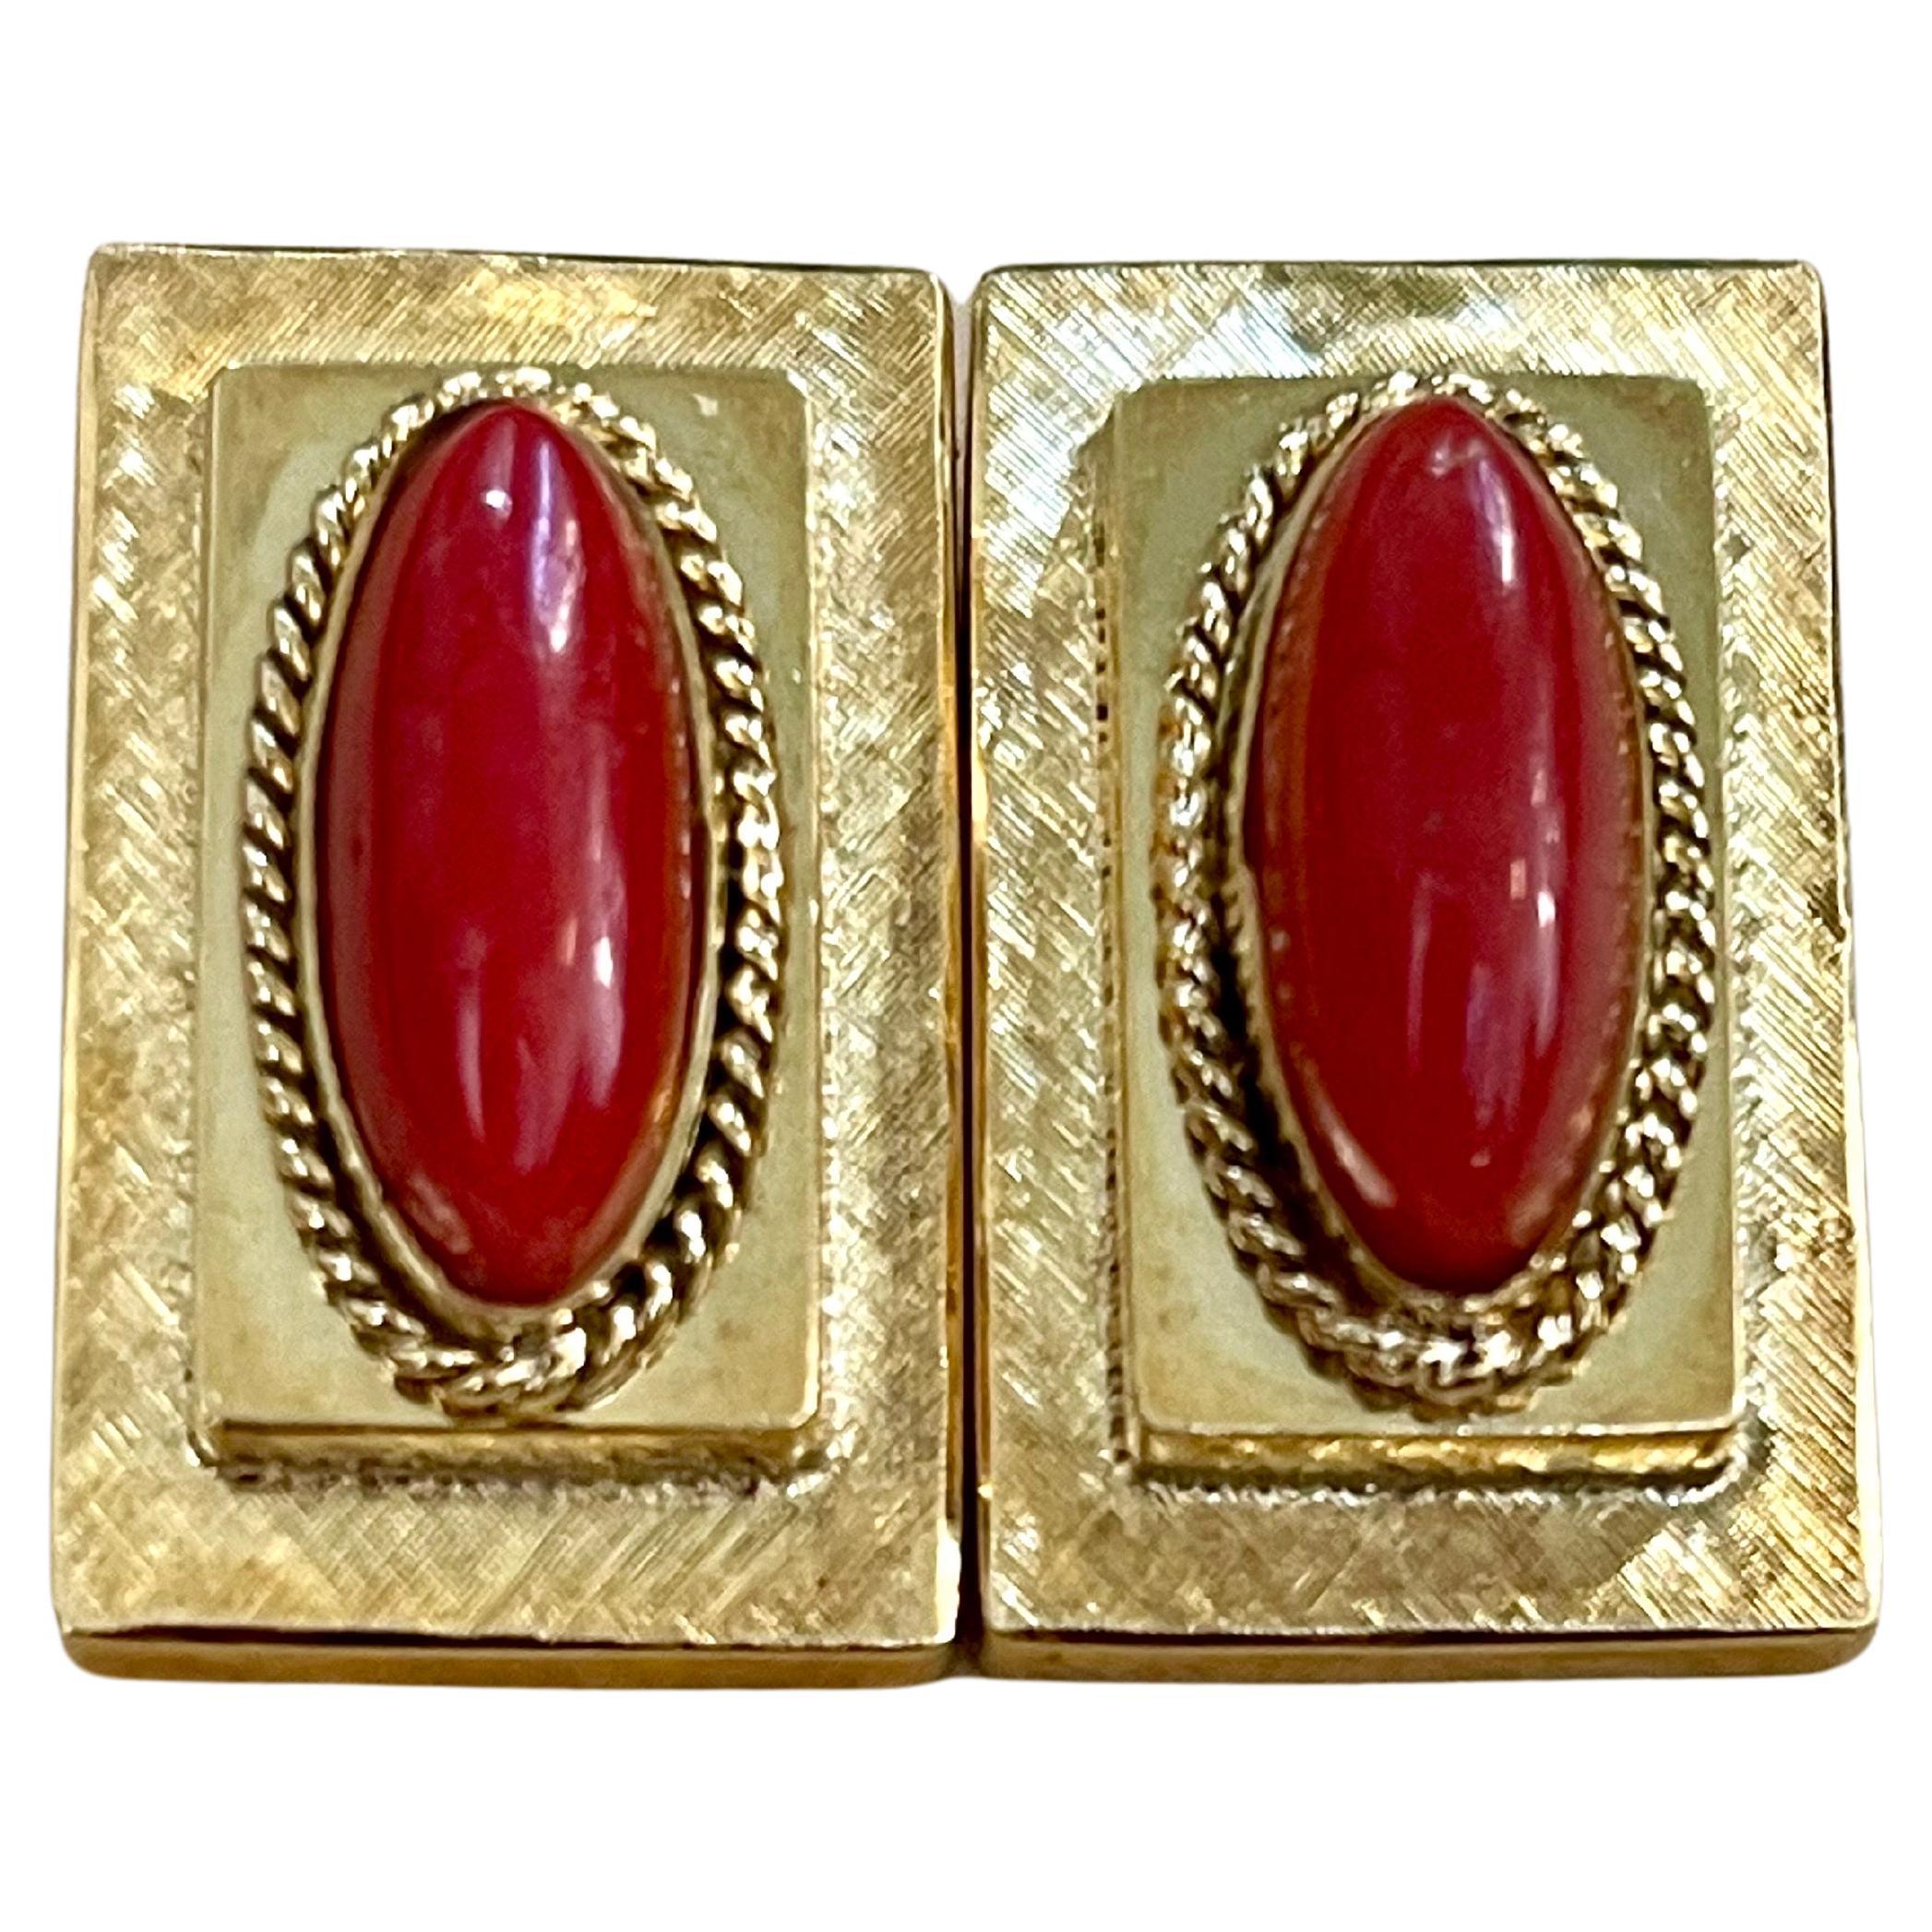  approximately 9 carat Natural Red Coral  Large Stud Earring in 18 Karat Yellow Gold , Clip on
 Coral Natural , Very Red/Tomato color , Very desirable color and quality. Approximately 9 ct total
perfect pair made in 18 Karat yellow gold. Natural